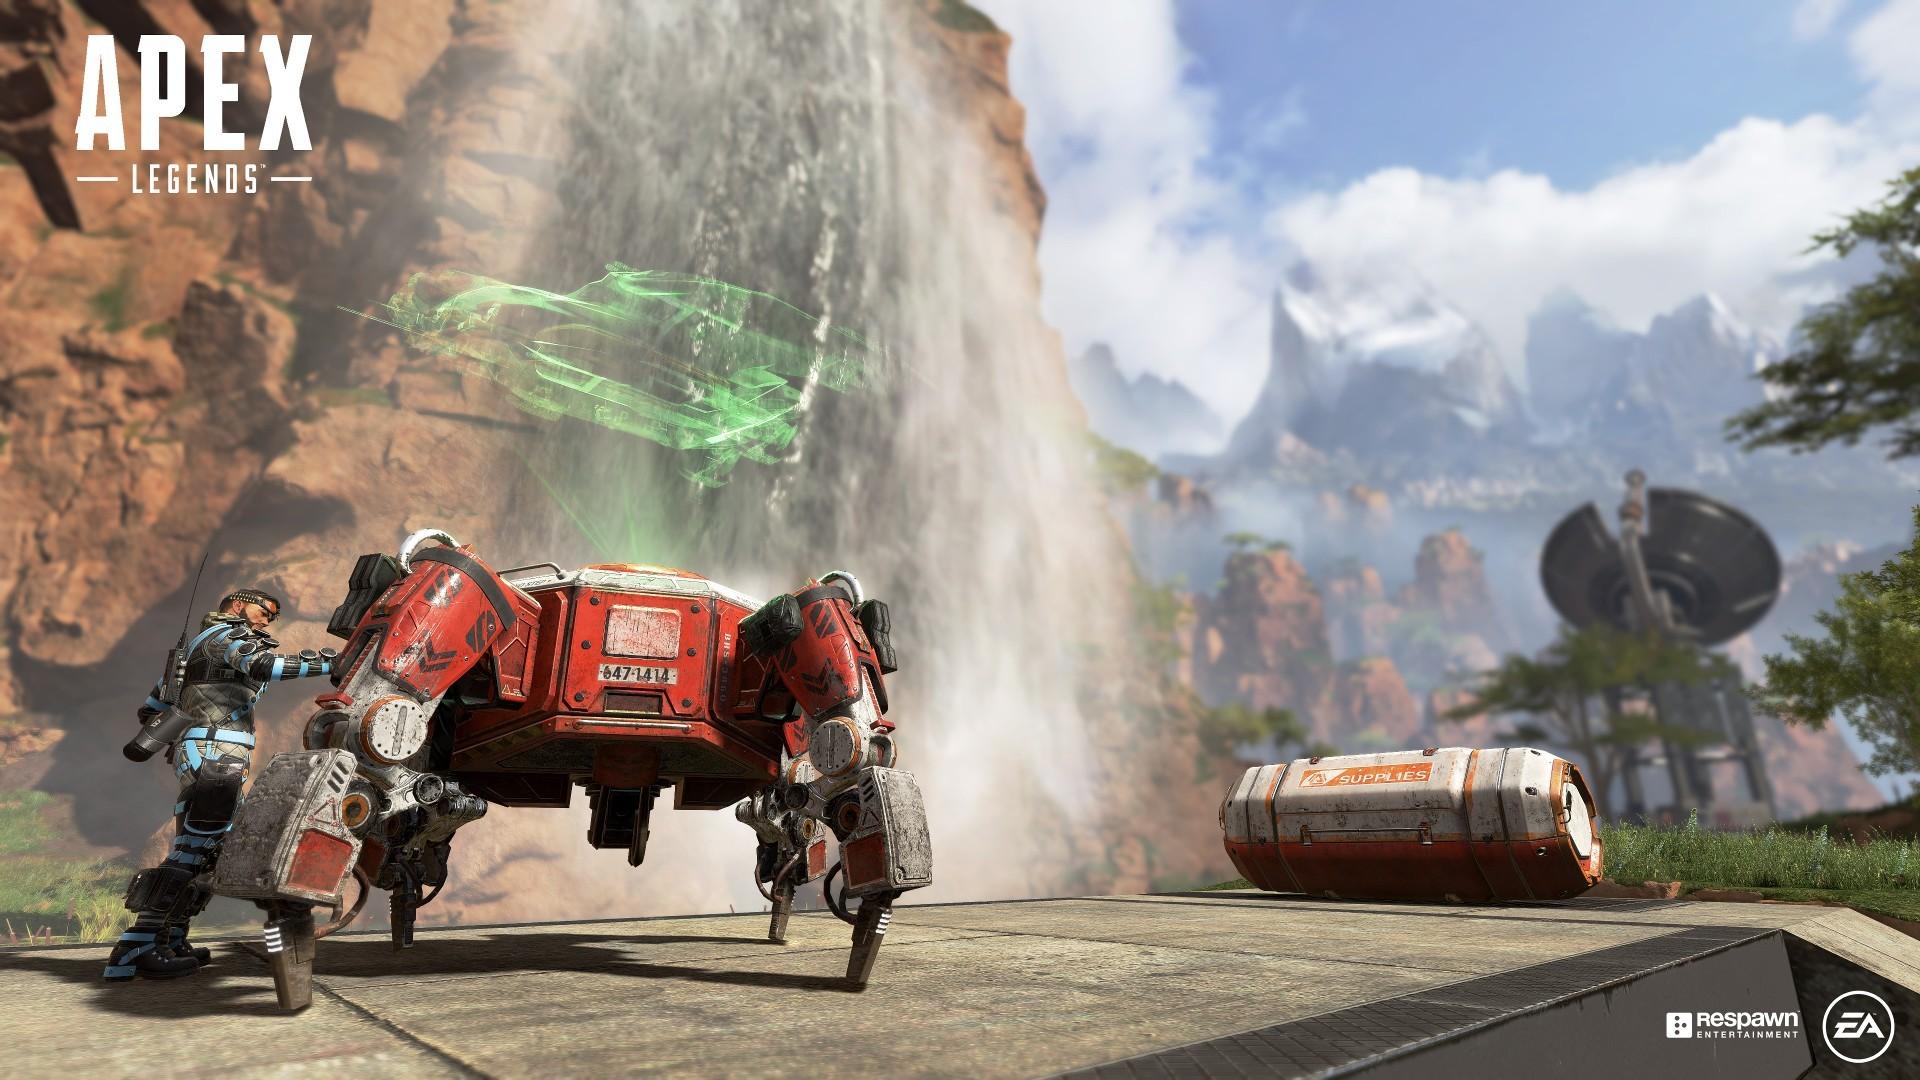 Apex Legends hits 25 million players, concurrent number at well